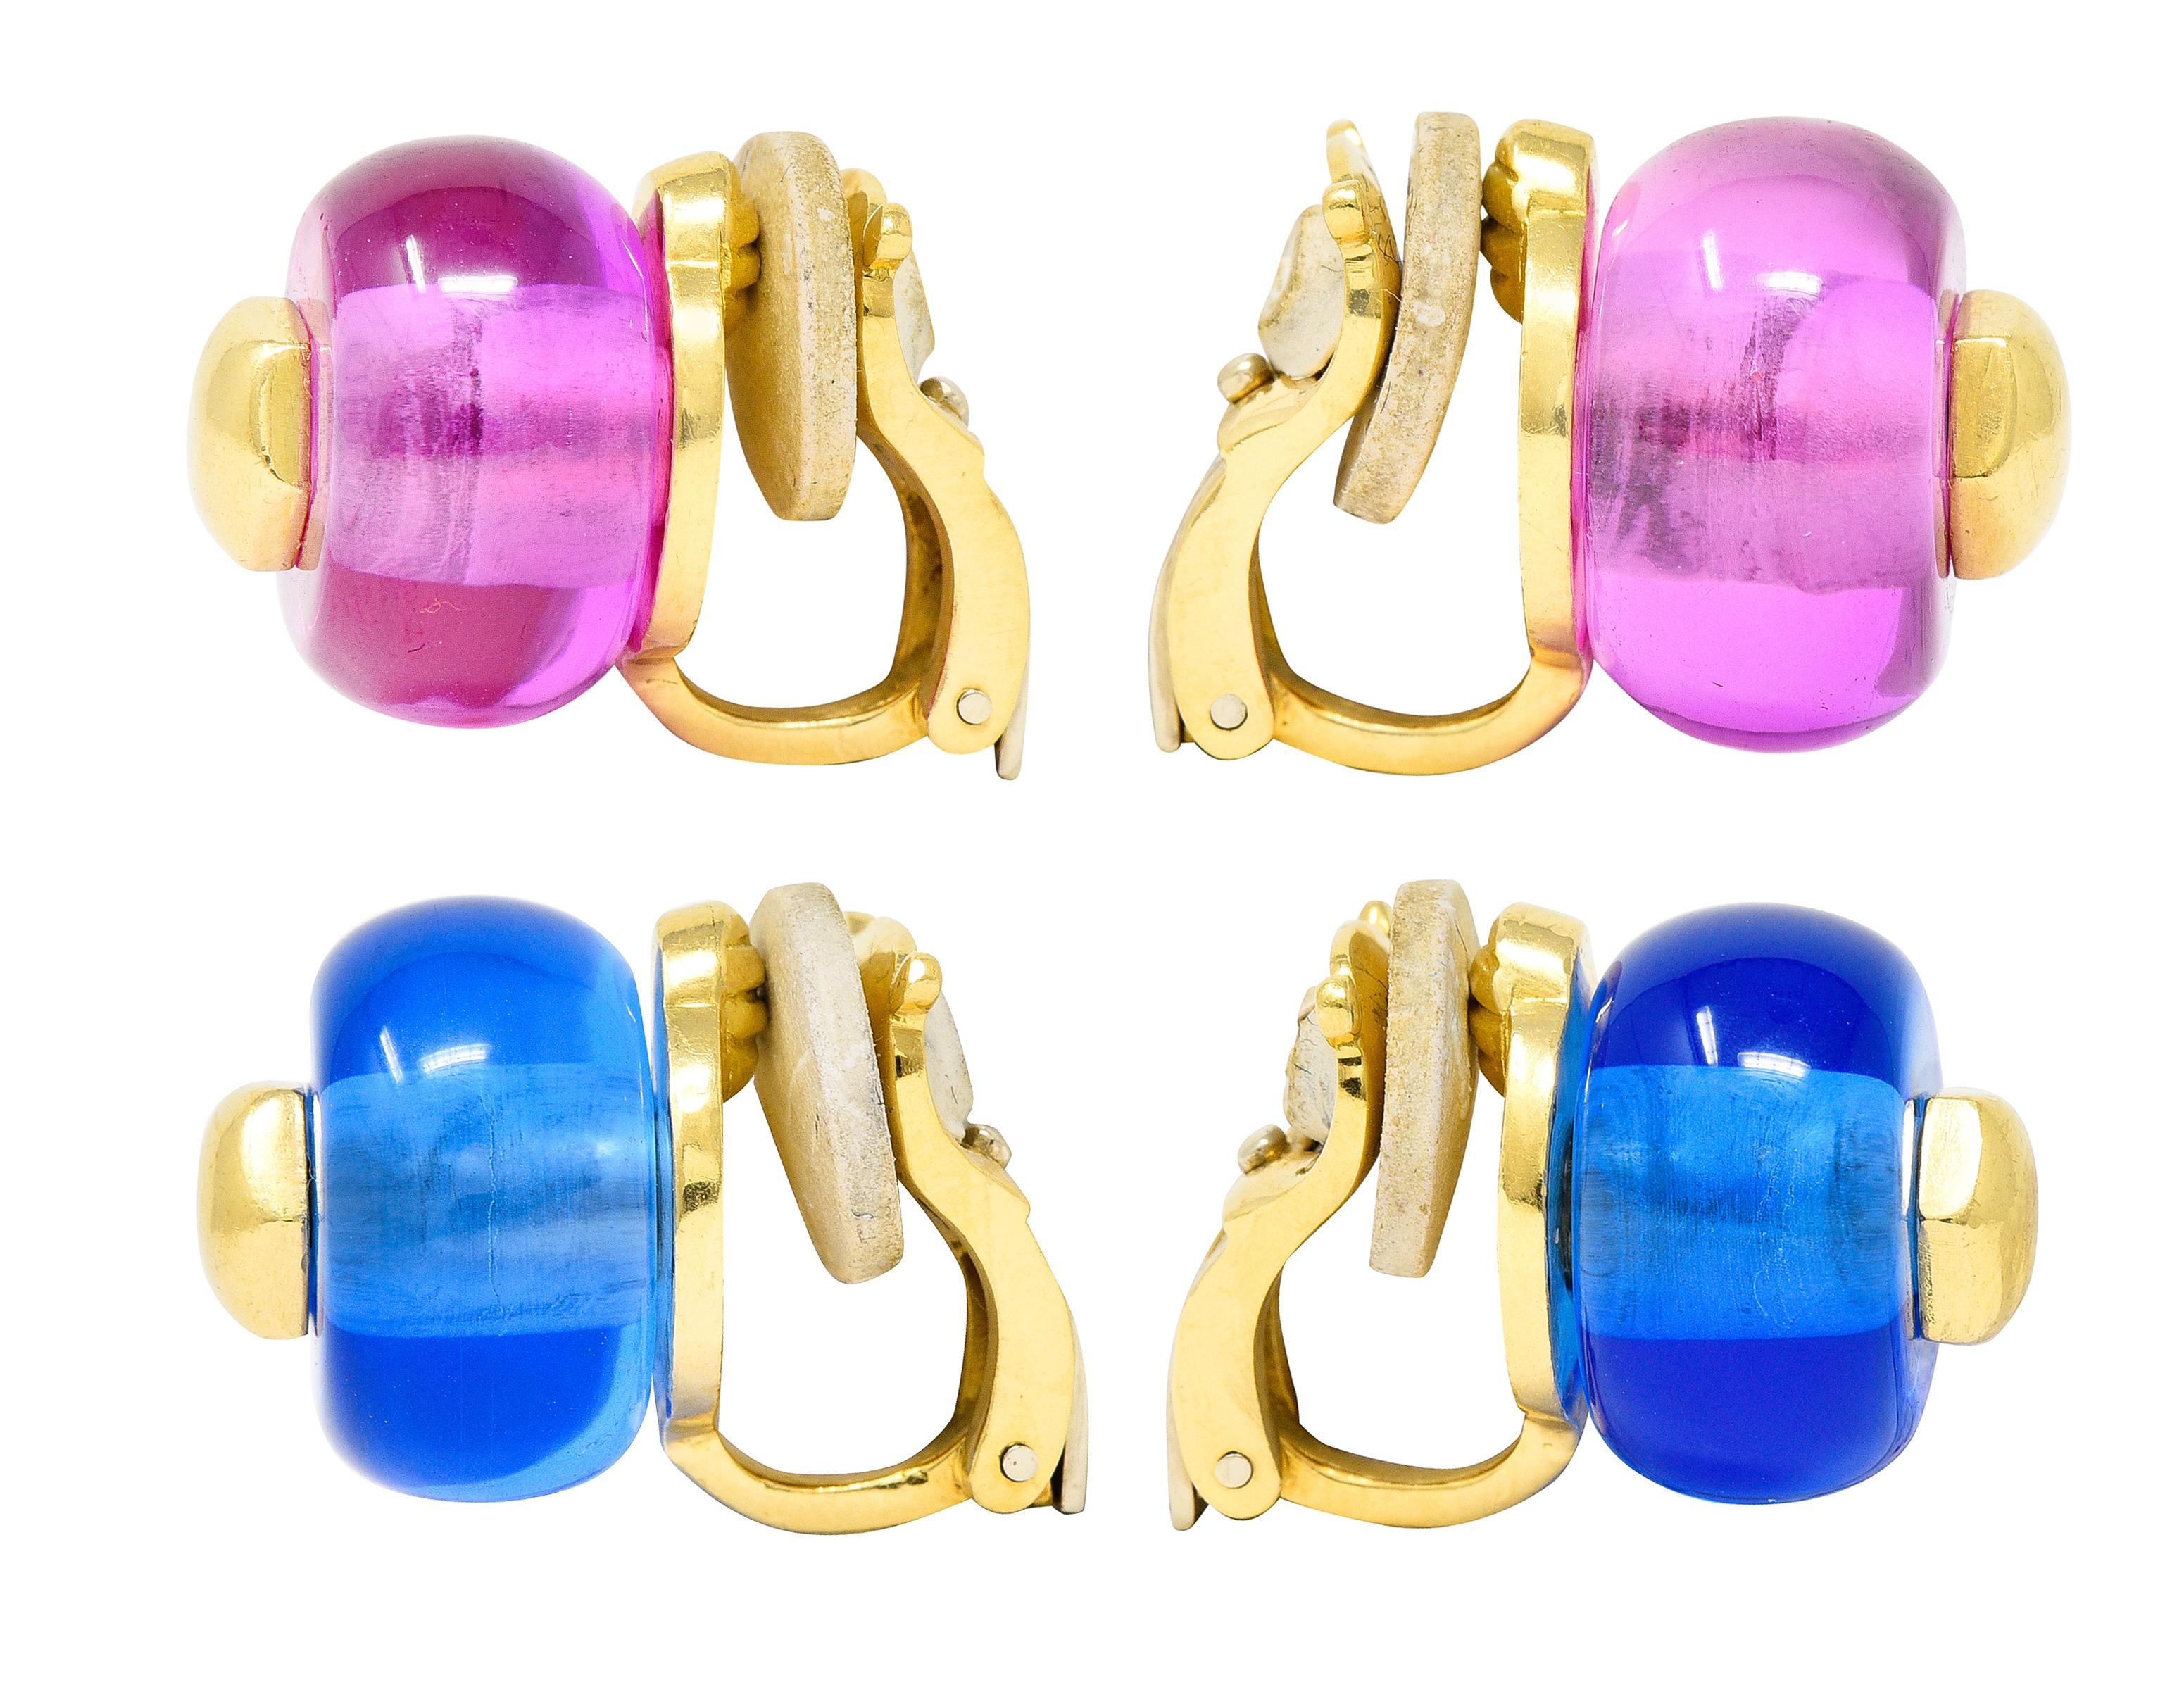 Ear-clip earrings features a protruding stem terminating as a functional hexagonal screw

Threaded screw removes to secure 14.5 mm round gemstone rondelle beads

Two sets of eye clean gemstone beads - medium light blue quartz and medium light pink